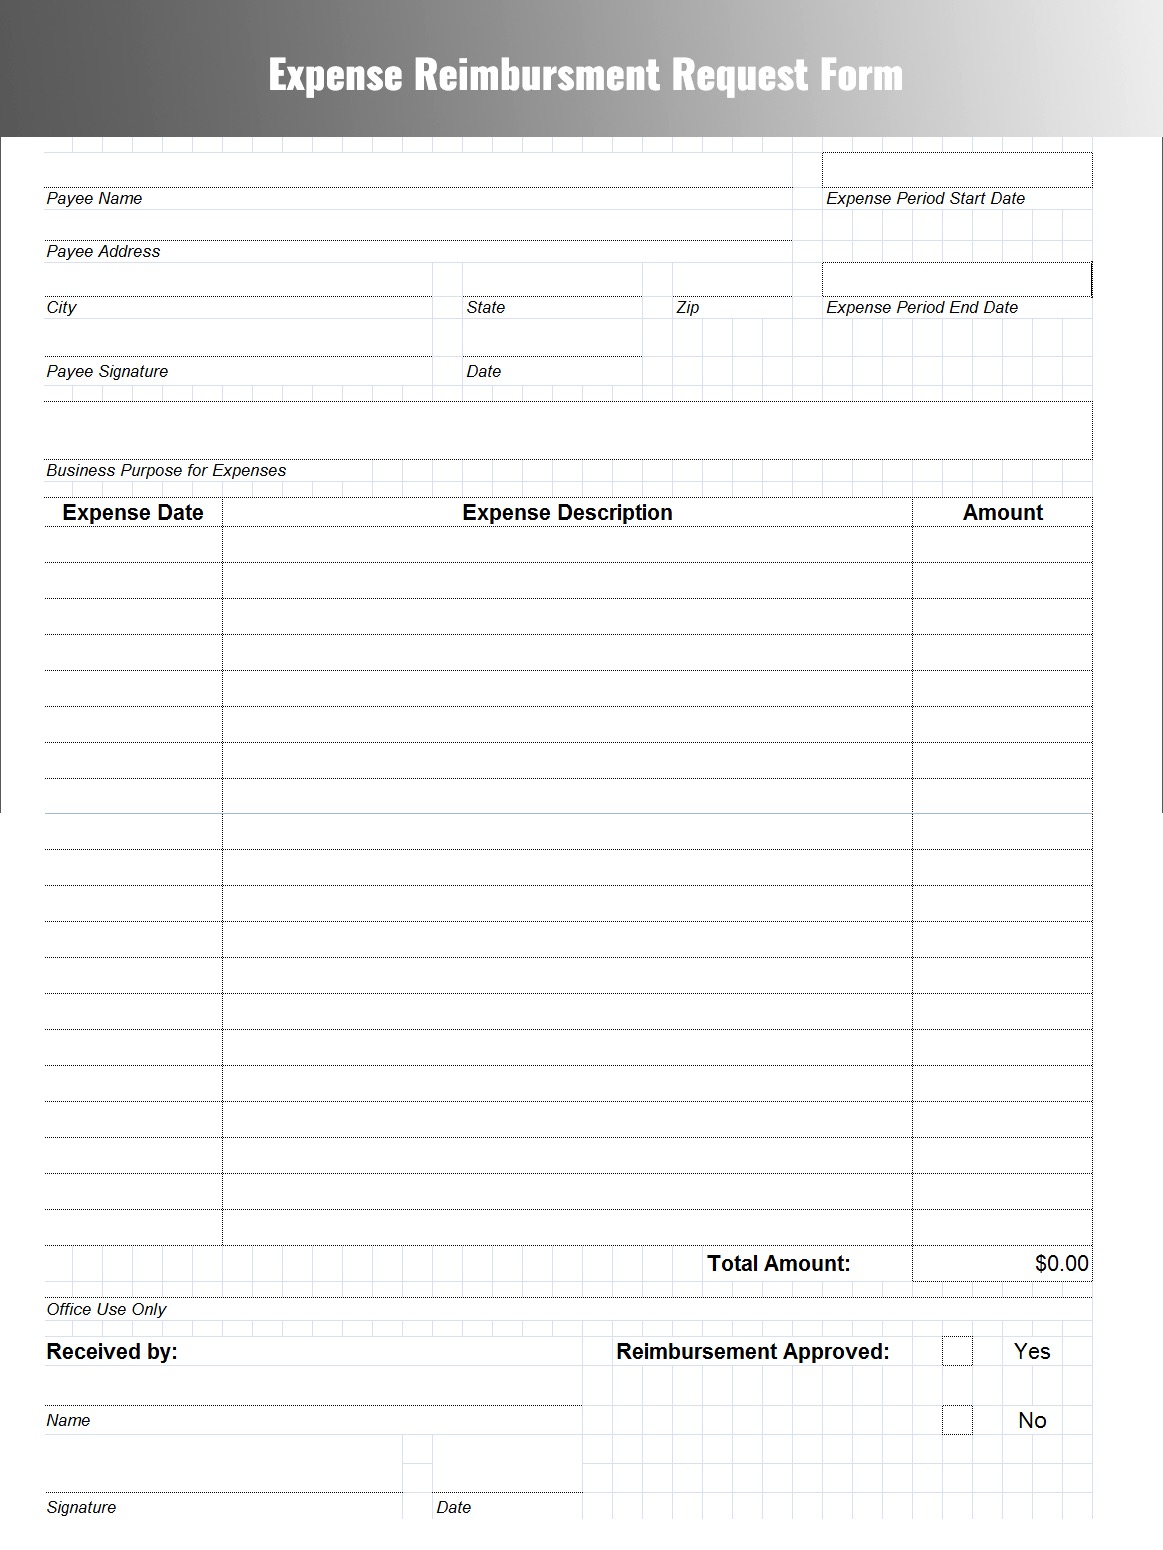 Generic Expense Report 1 Expense Spreadsheet Spreadsheet Templates for Busines Travel ...1163 x 1550